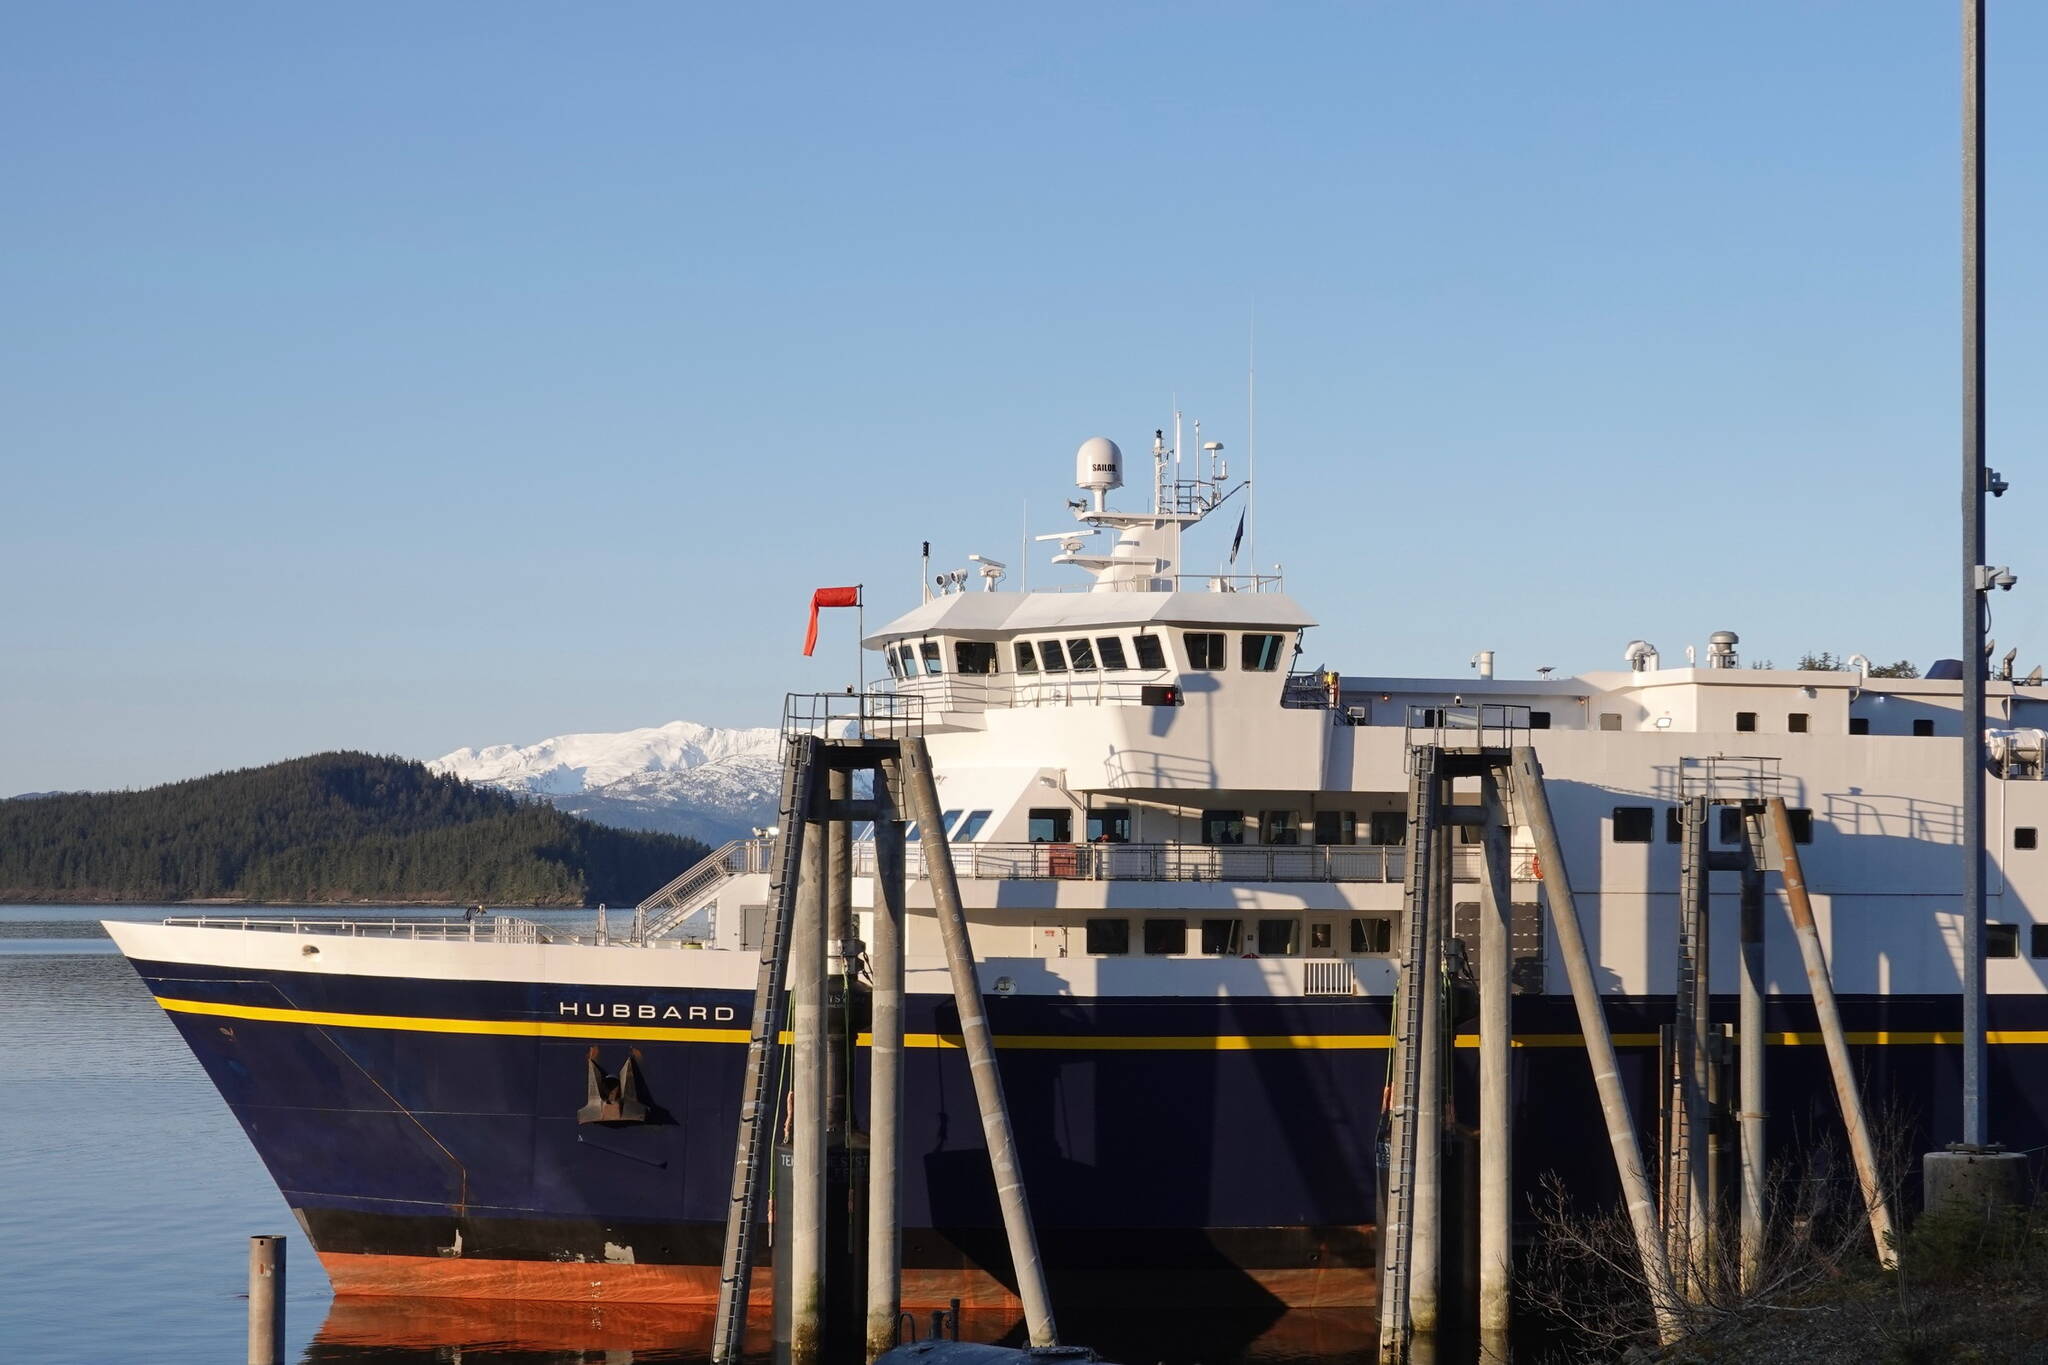 The Hubbard, the newest vessel in the Alaska Marine Highway System fleet, docks at the Auke Bay Ferry Terminal on April 18. It is generally scheduled to provide dayboat service between Juneau, Haines and Skagway. (Photo by Laurie Craig)